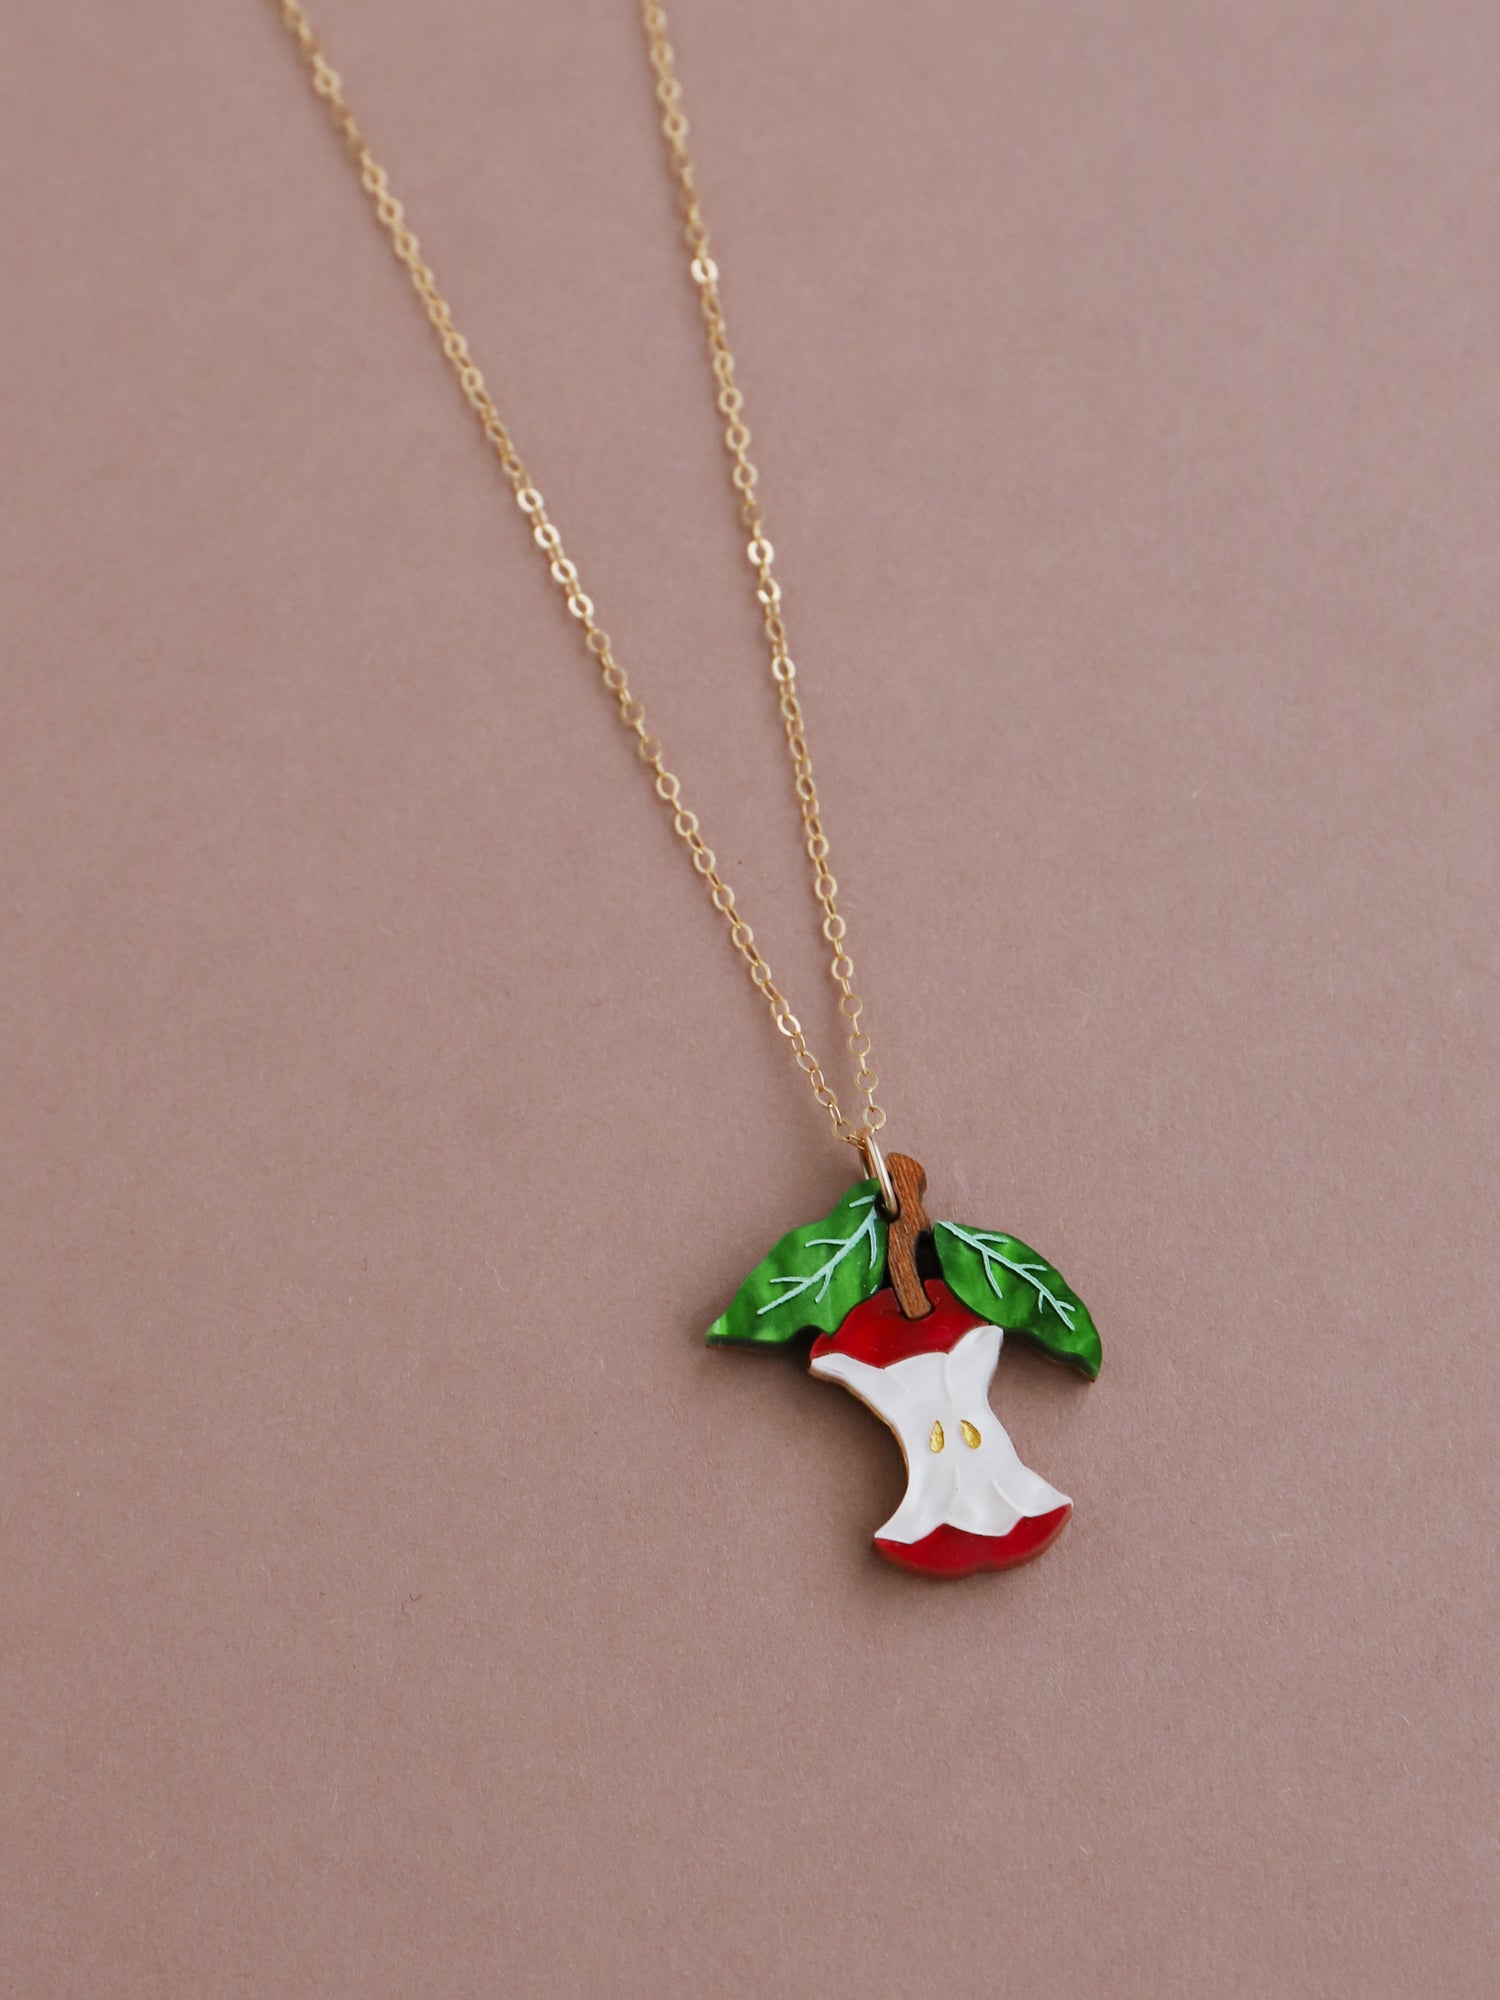 Apple Necklace in Red